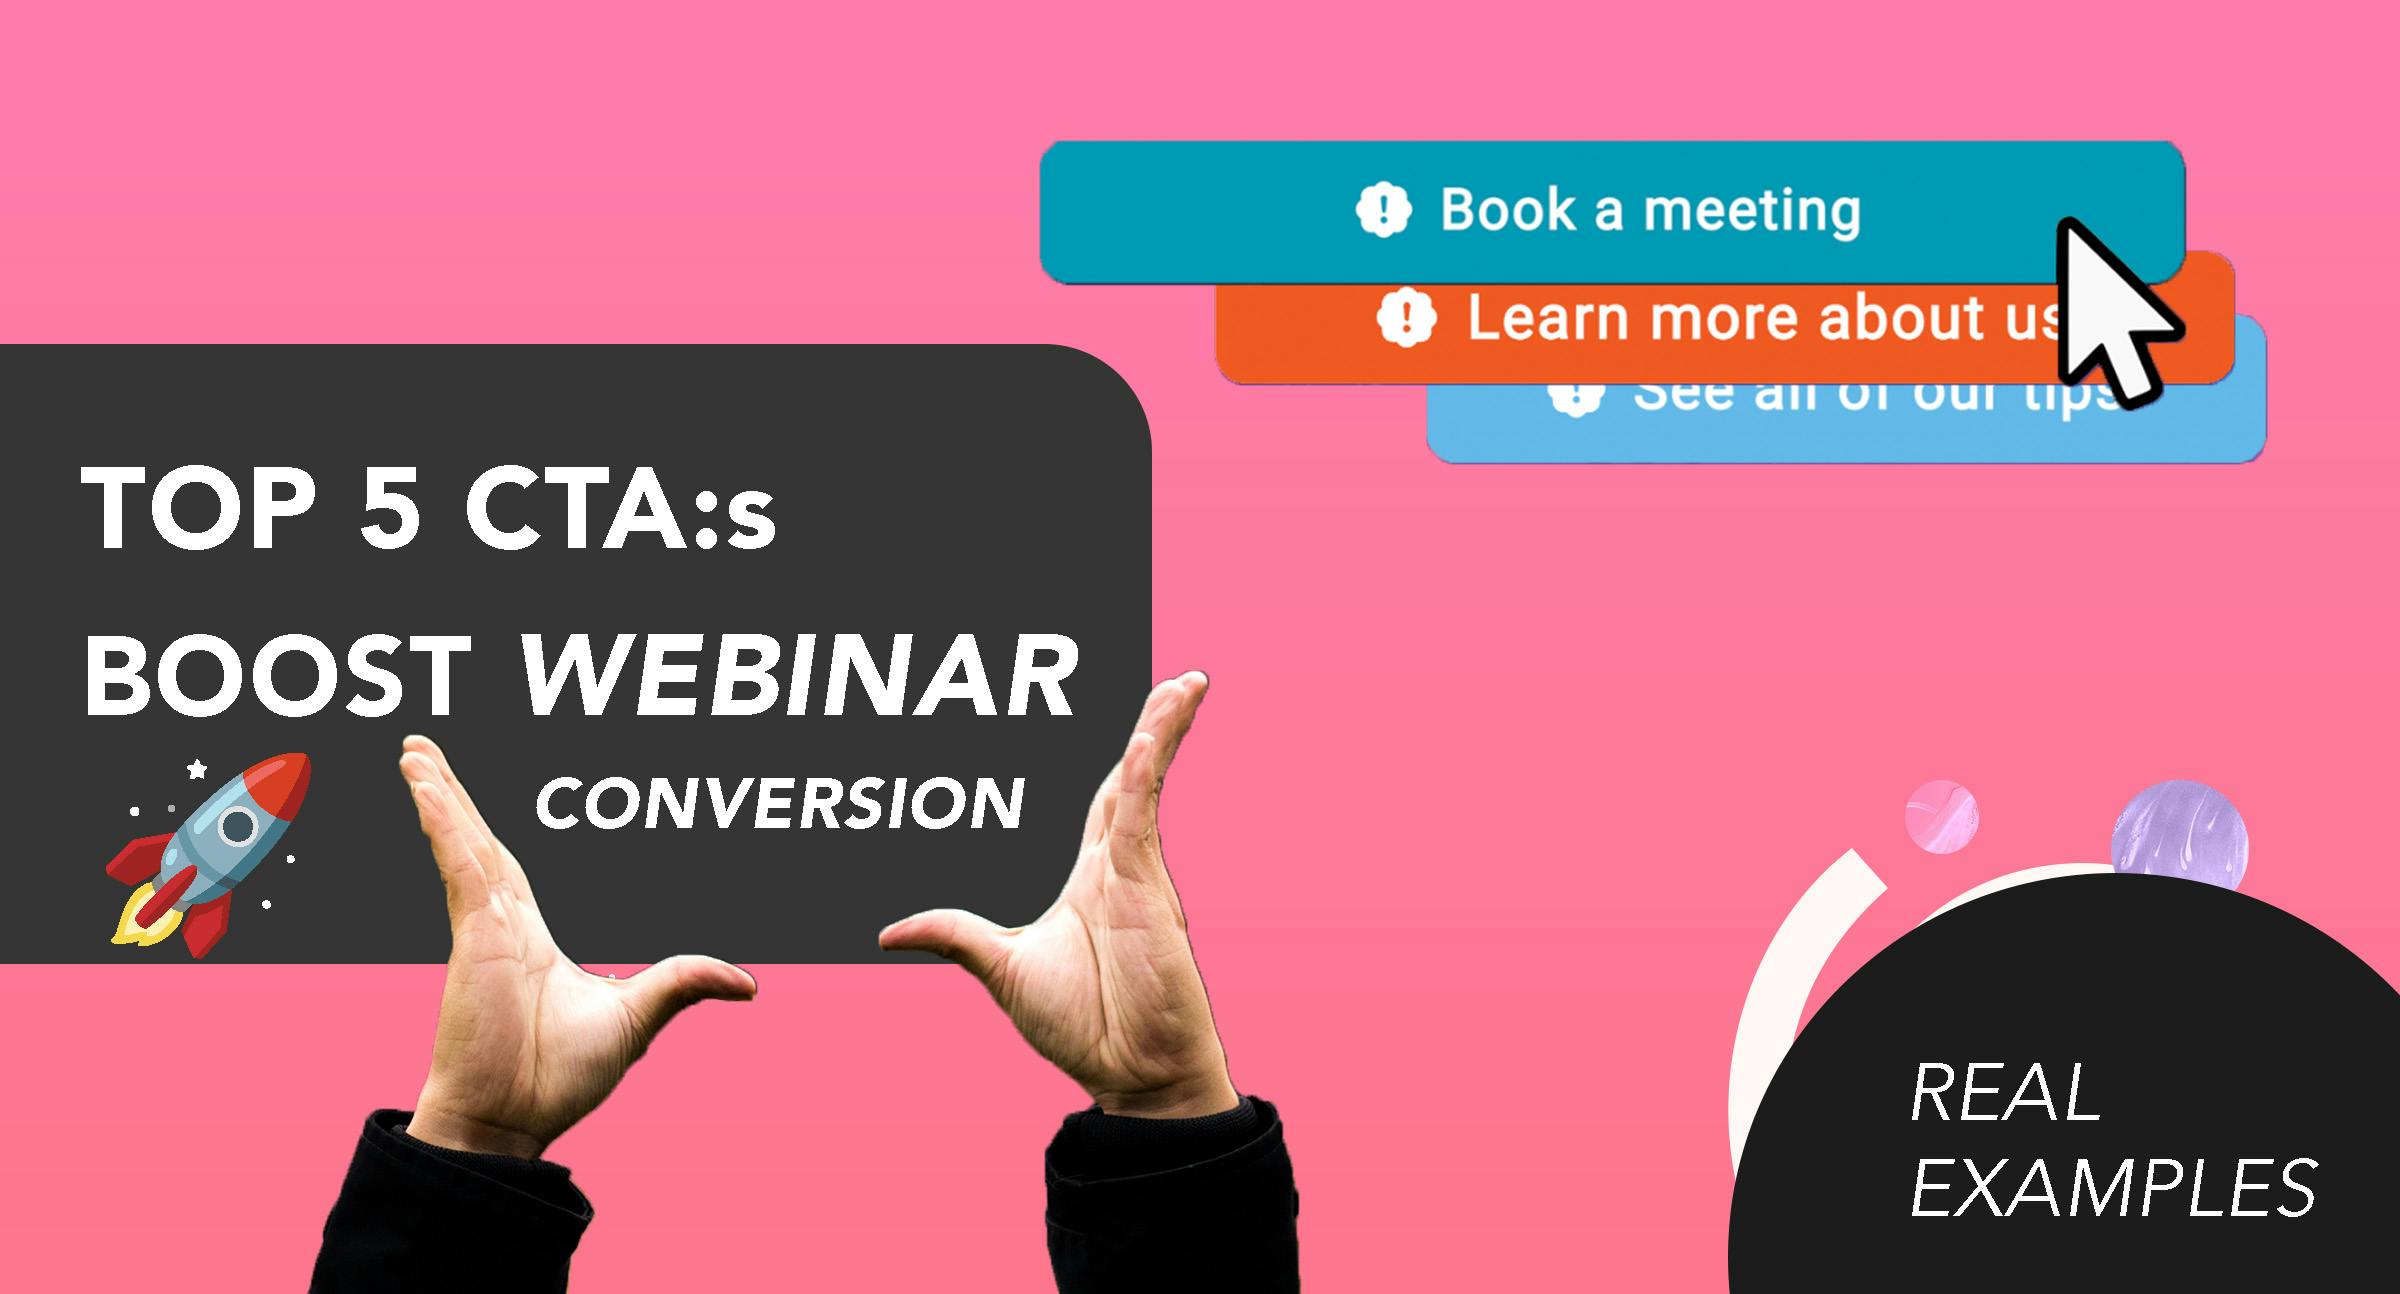 Boost webinar conversion rates with top 5 CTA examples. Create effective call to actions to drive conversions. Maximize sales with these proven examples.